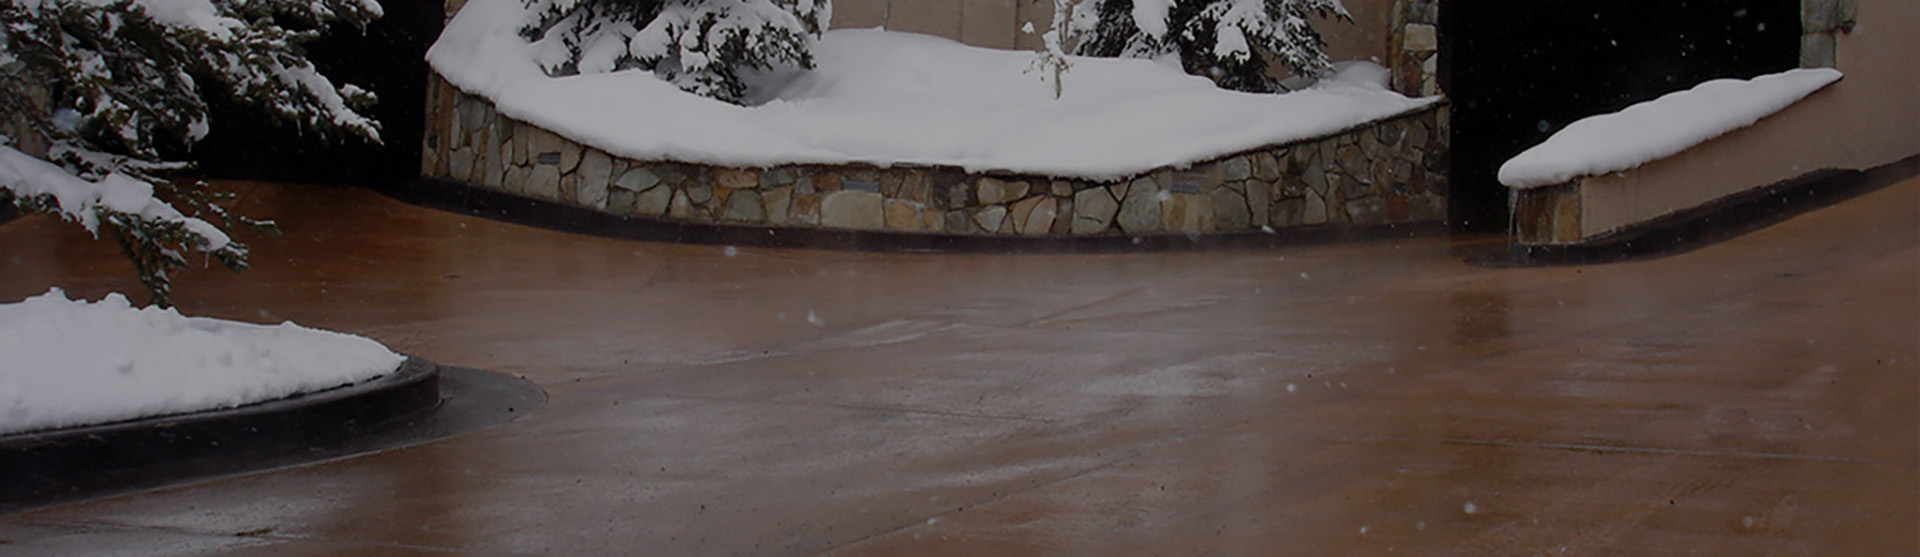 Heated concrete driveway after snowstorm banner